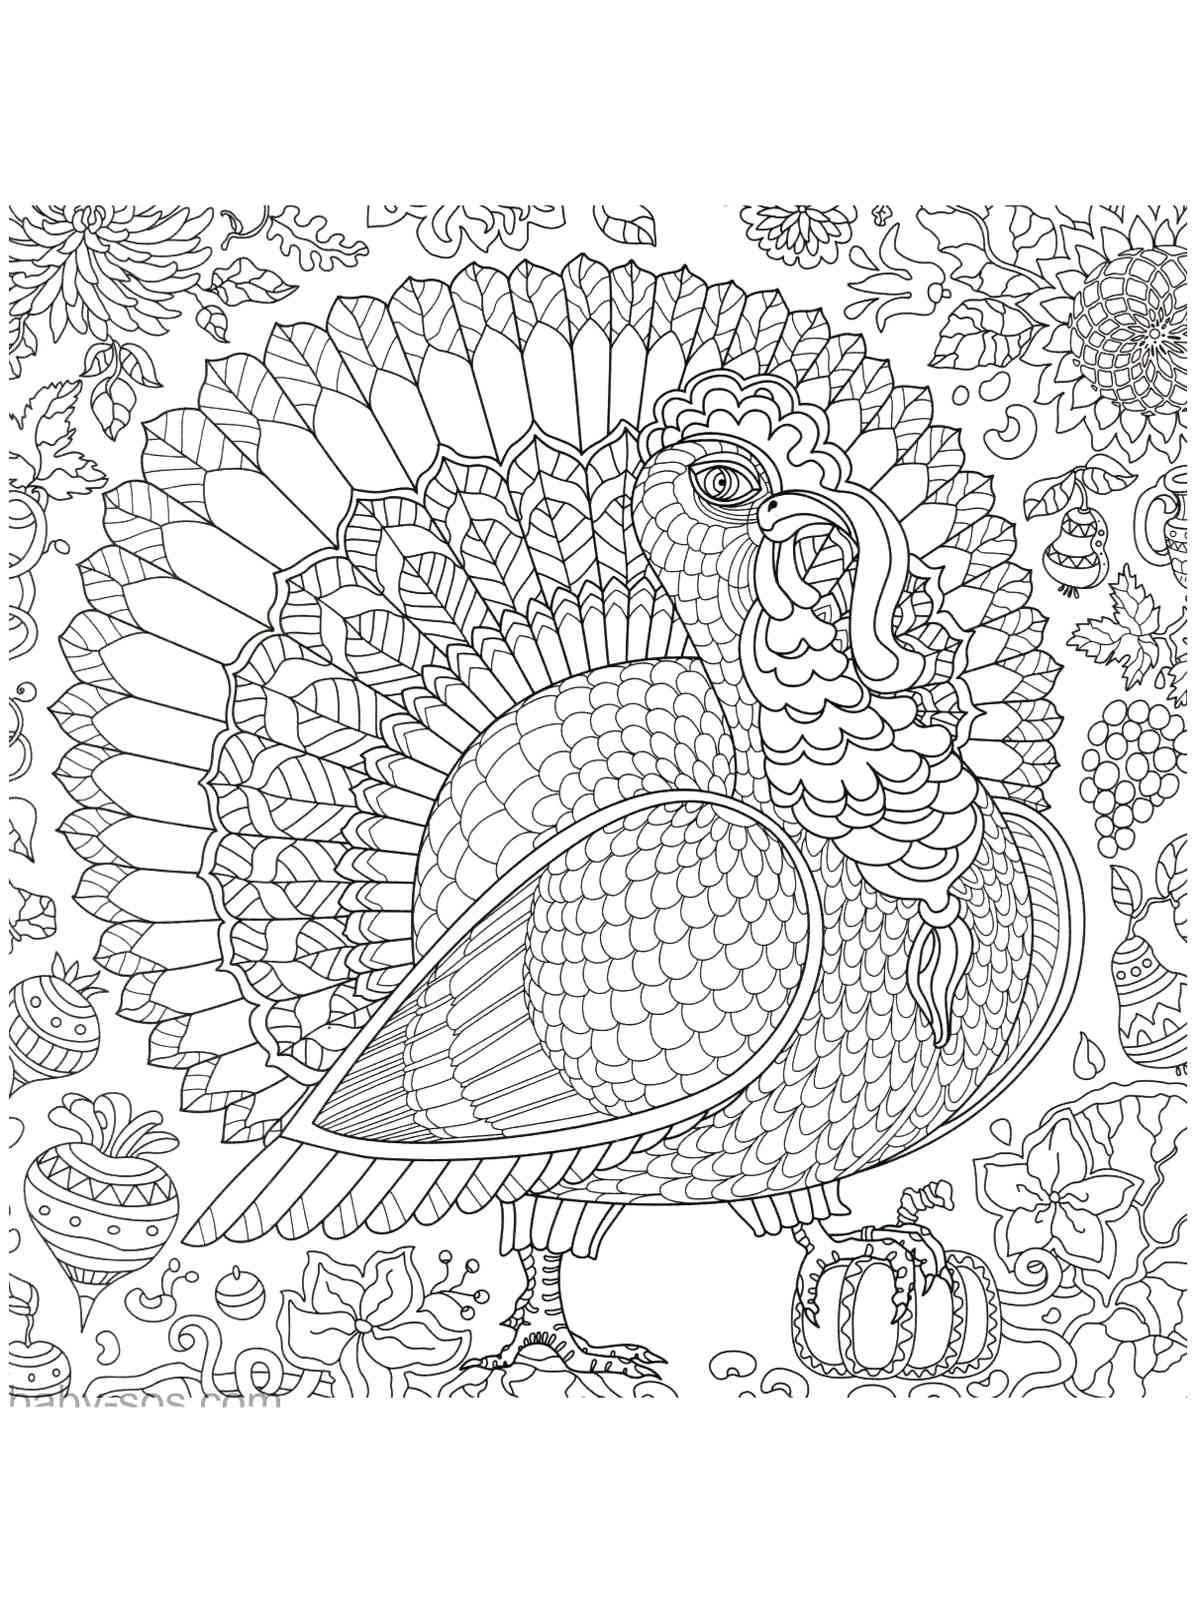 Turkey coloring pages for adults